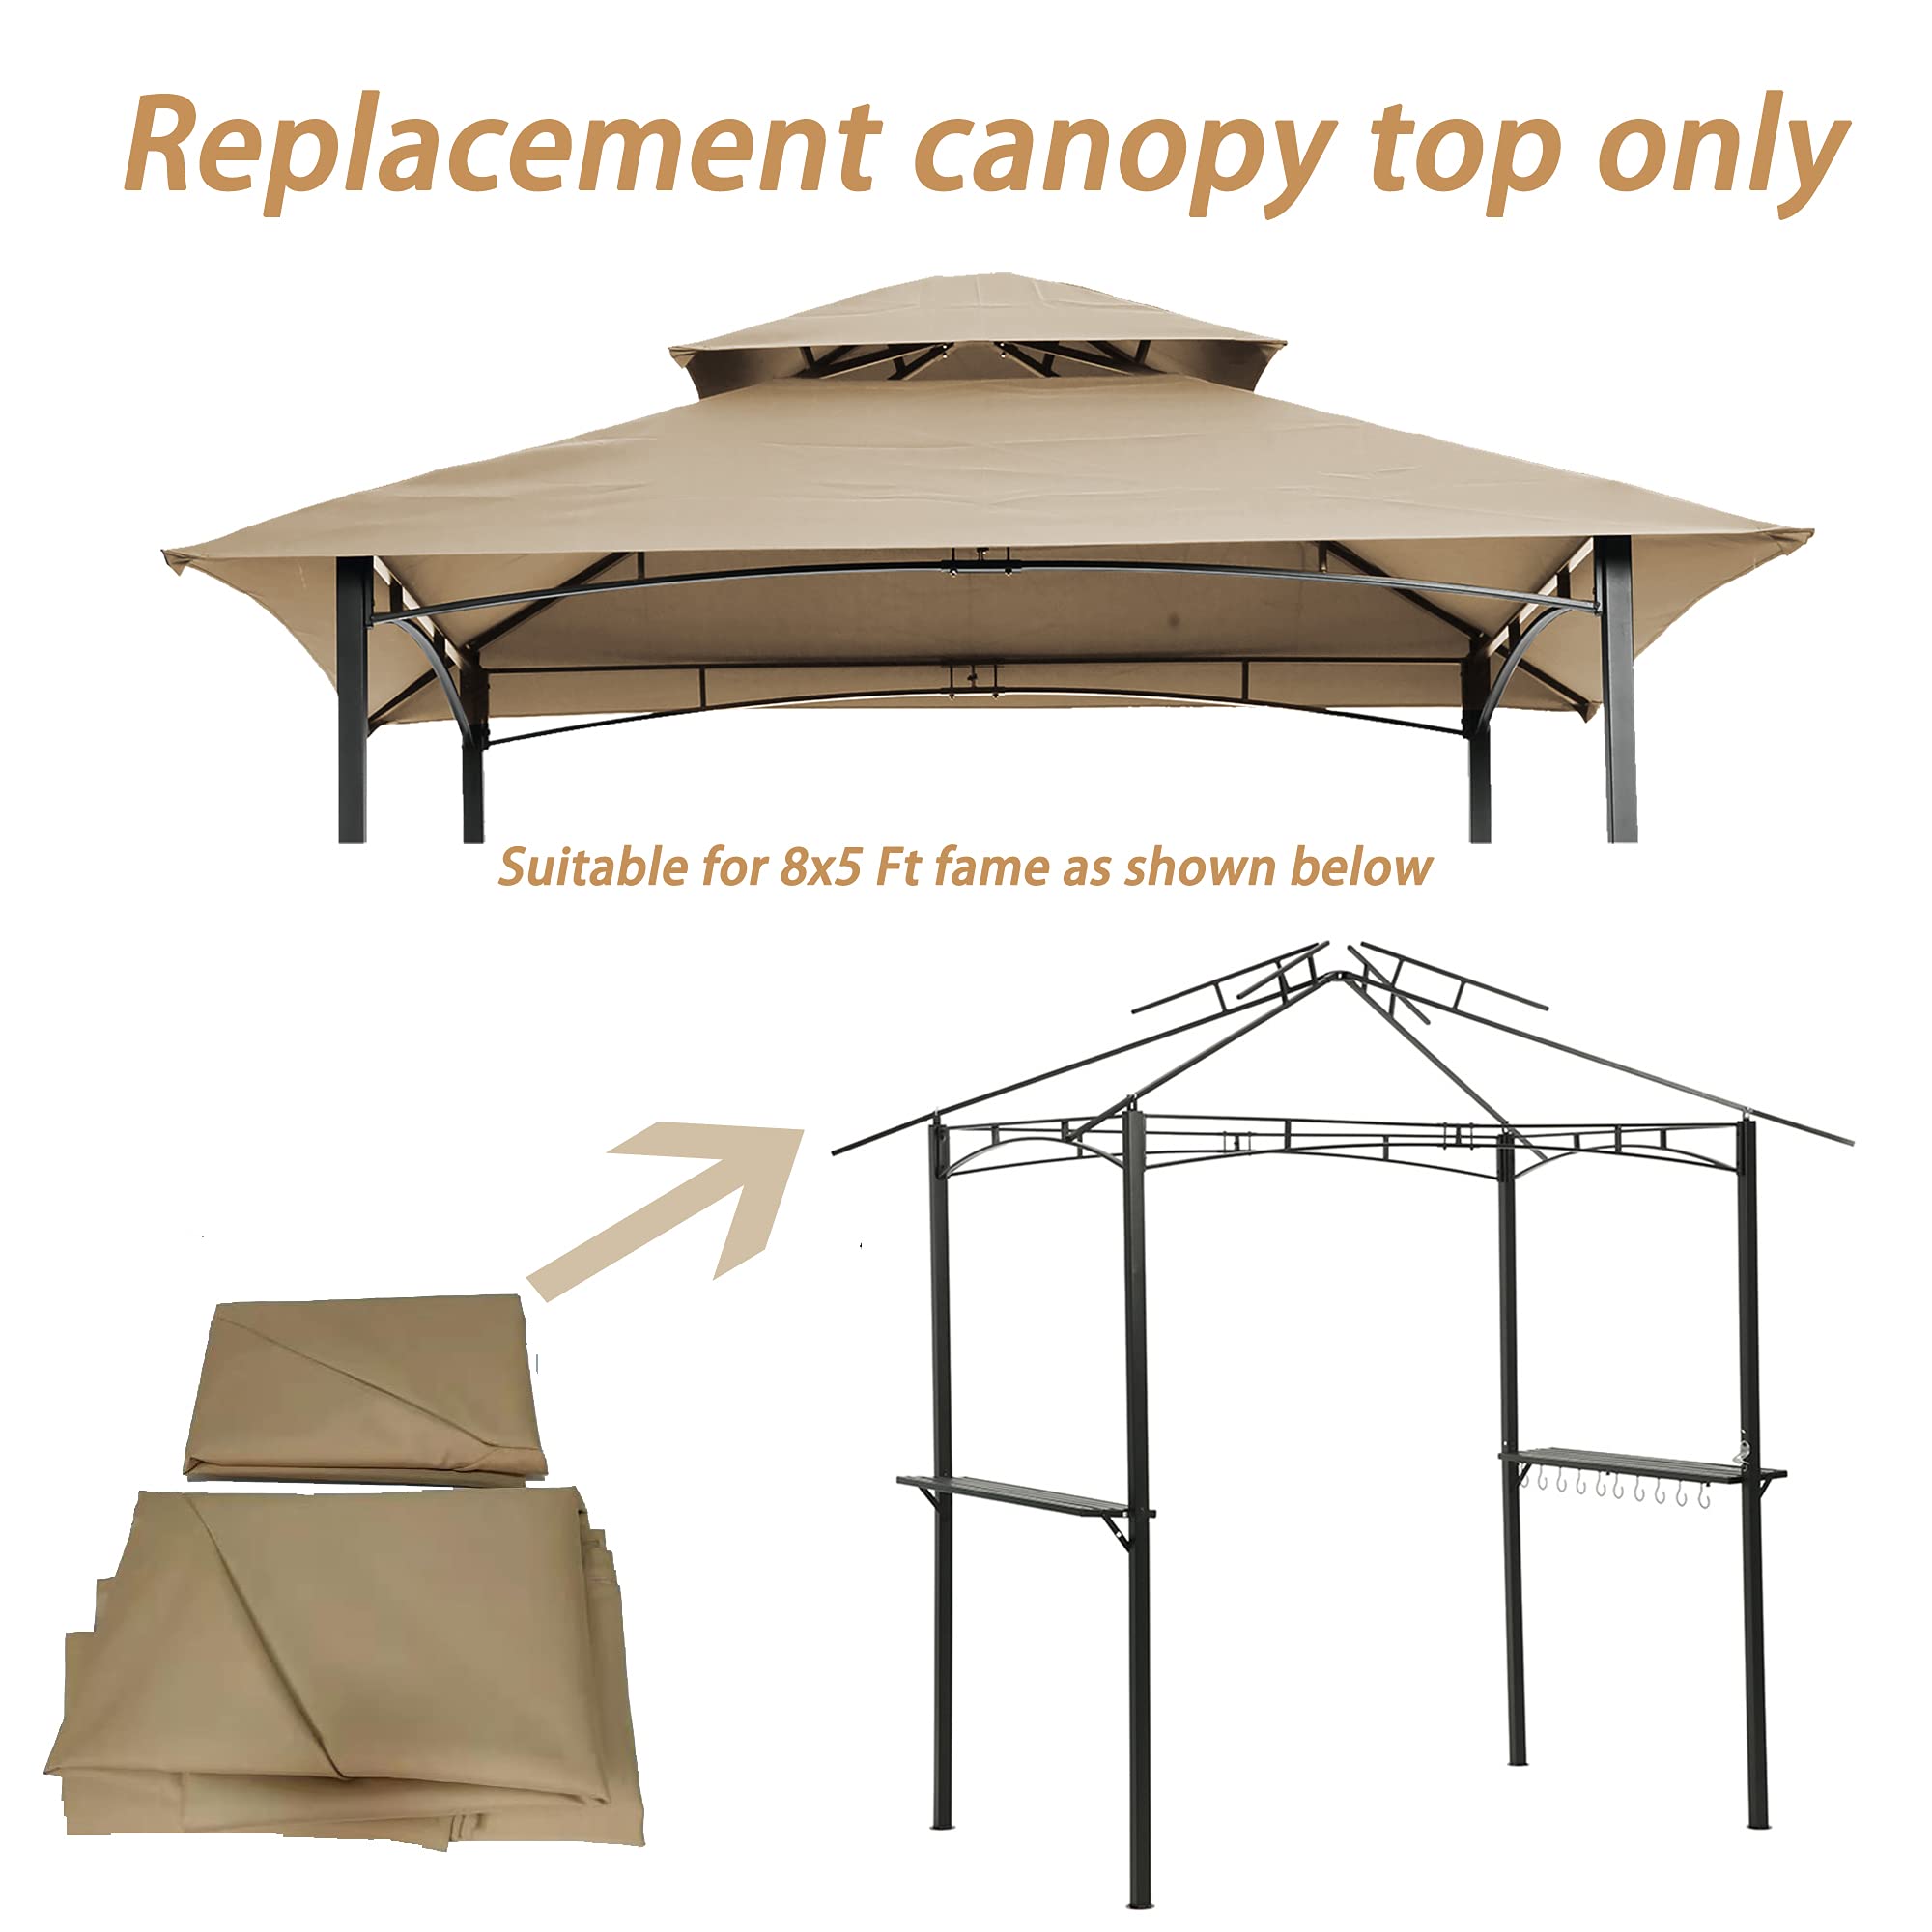 JASOYA gt7-cxx 8x5Ft Grill Gazebo Replacement Canopy,Double Tiered BBQ Tent Roof Top Cover,Beige